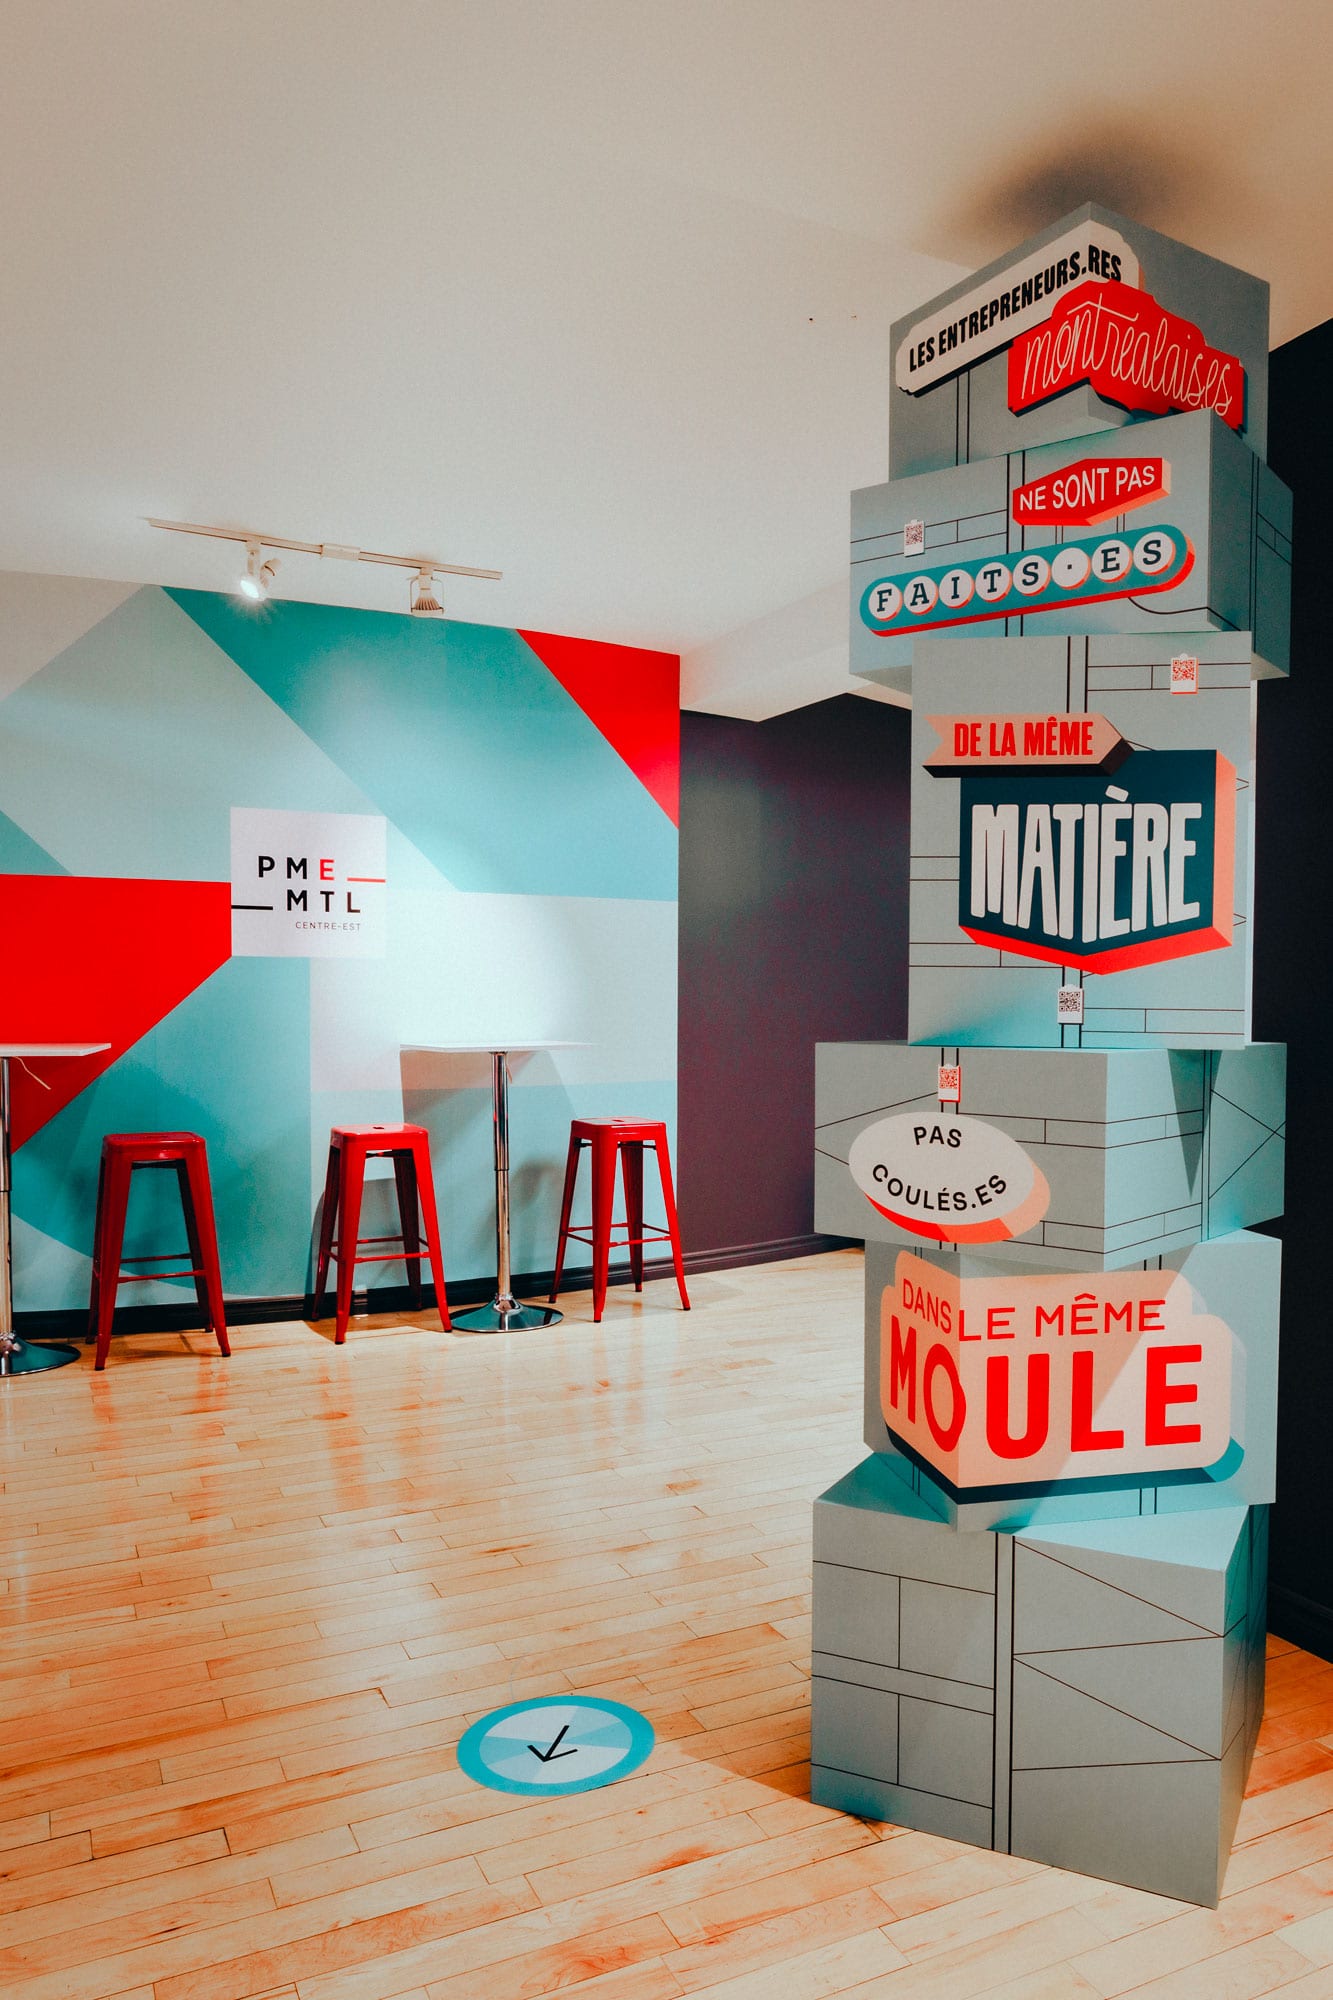 Office Space Design - PME MTL - Interactive Mural by MASSIVart and Paprika